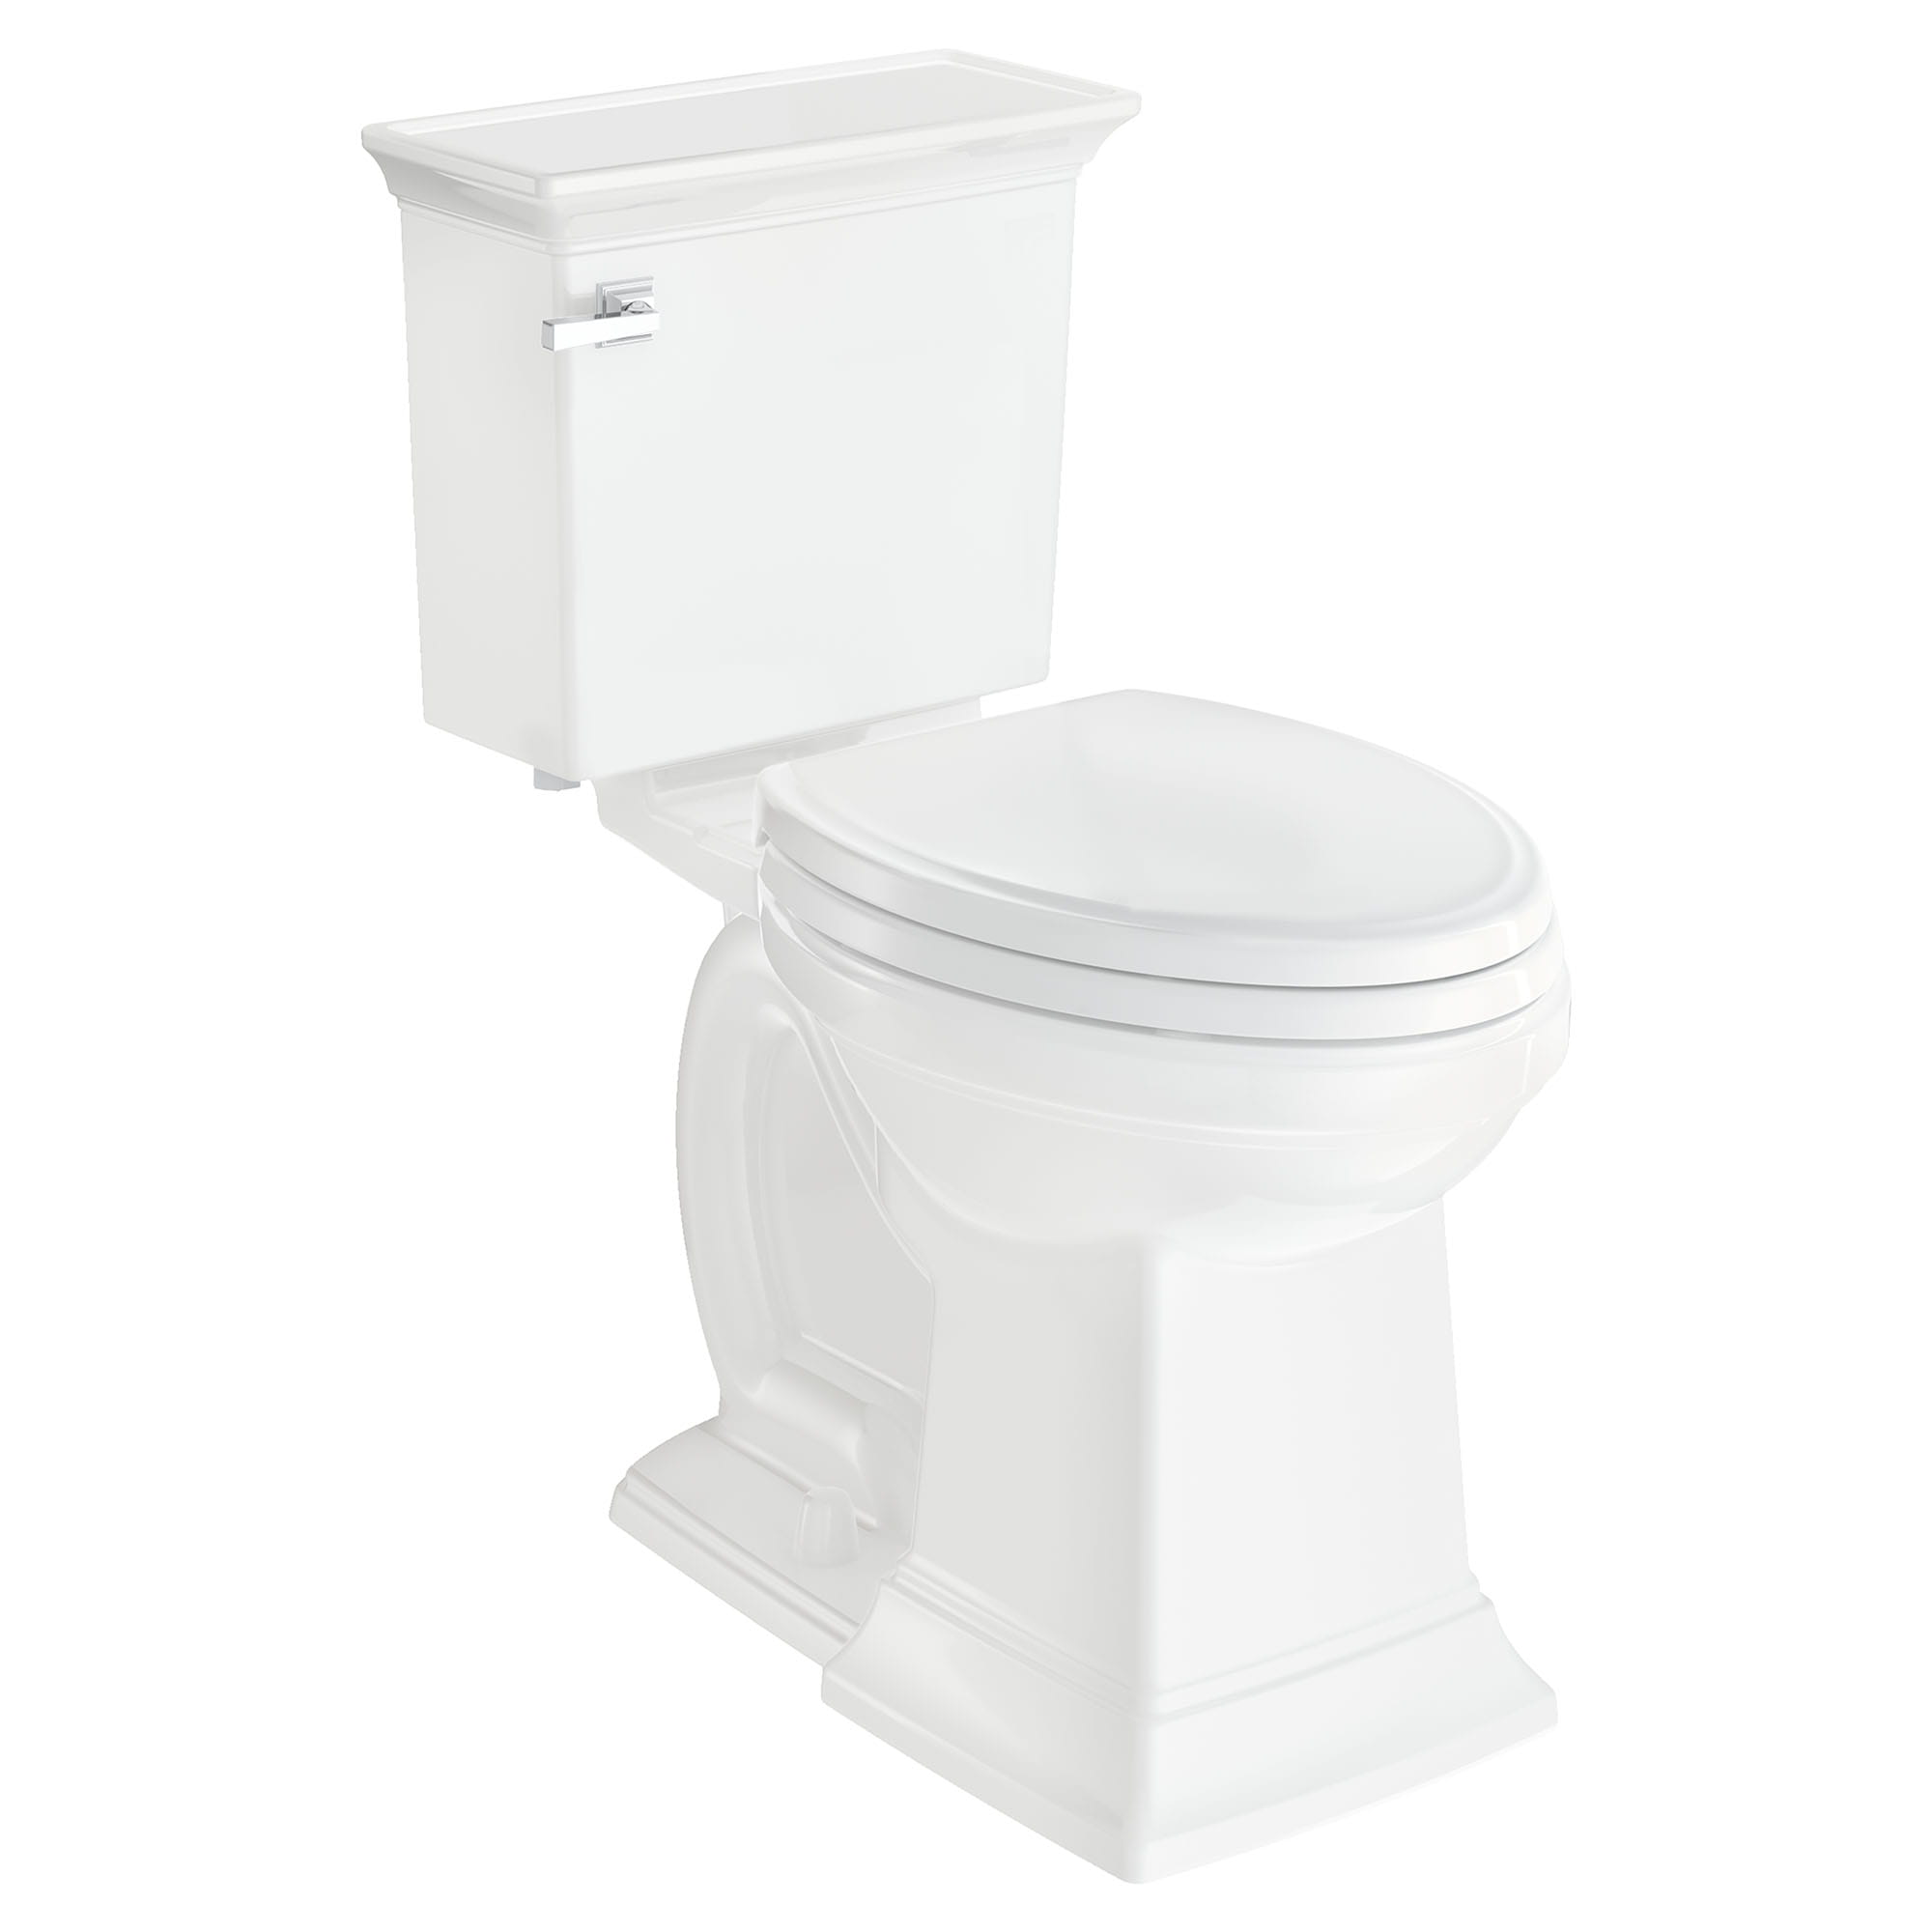 Toilet Seat Soft Close Plastic With Fittings Easy Clean Universal Standard Size 